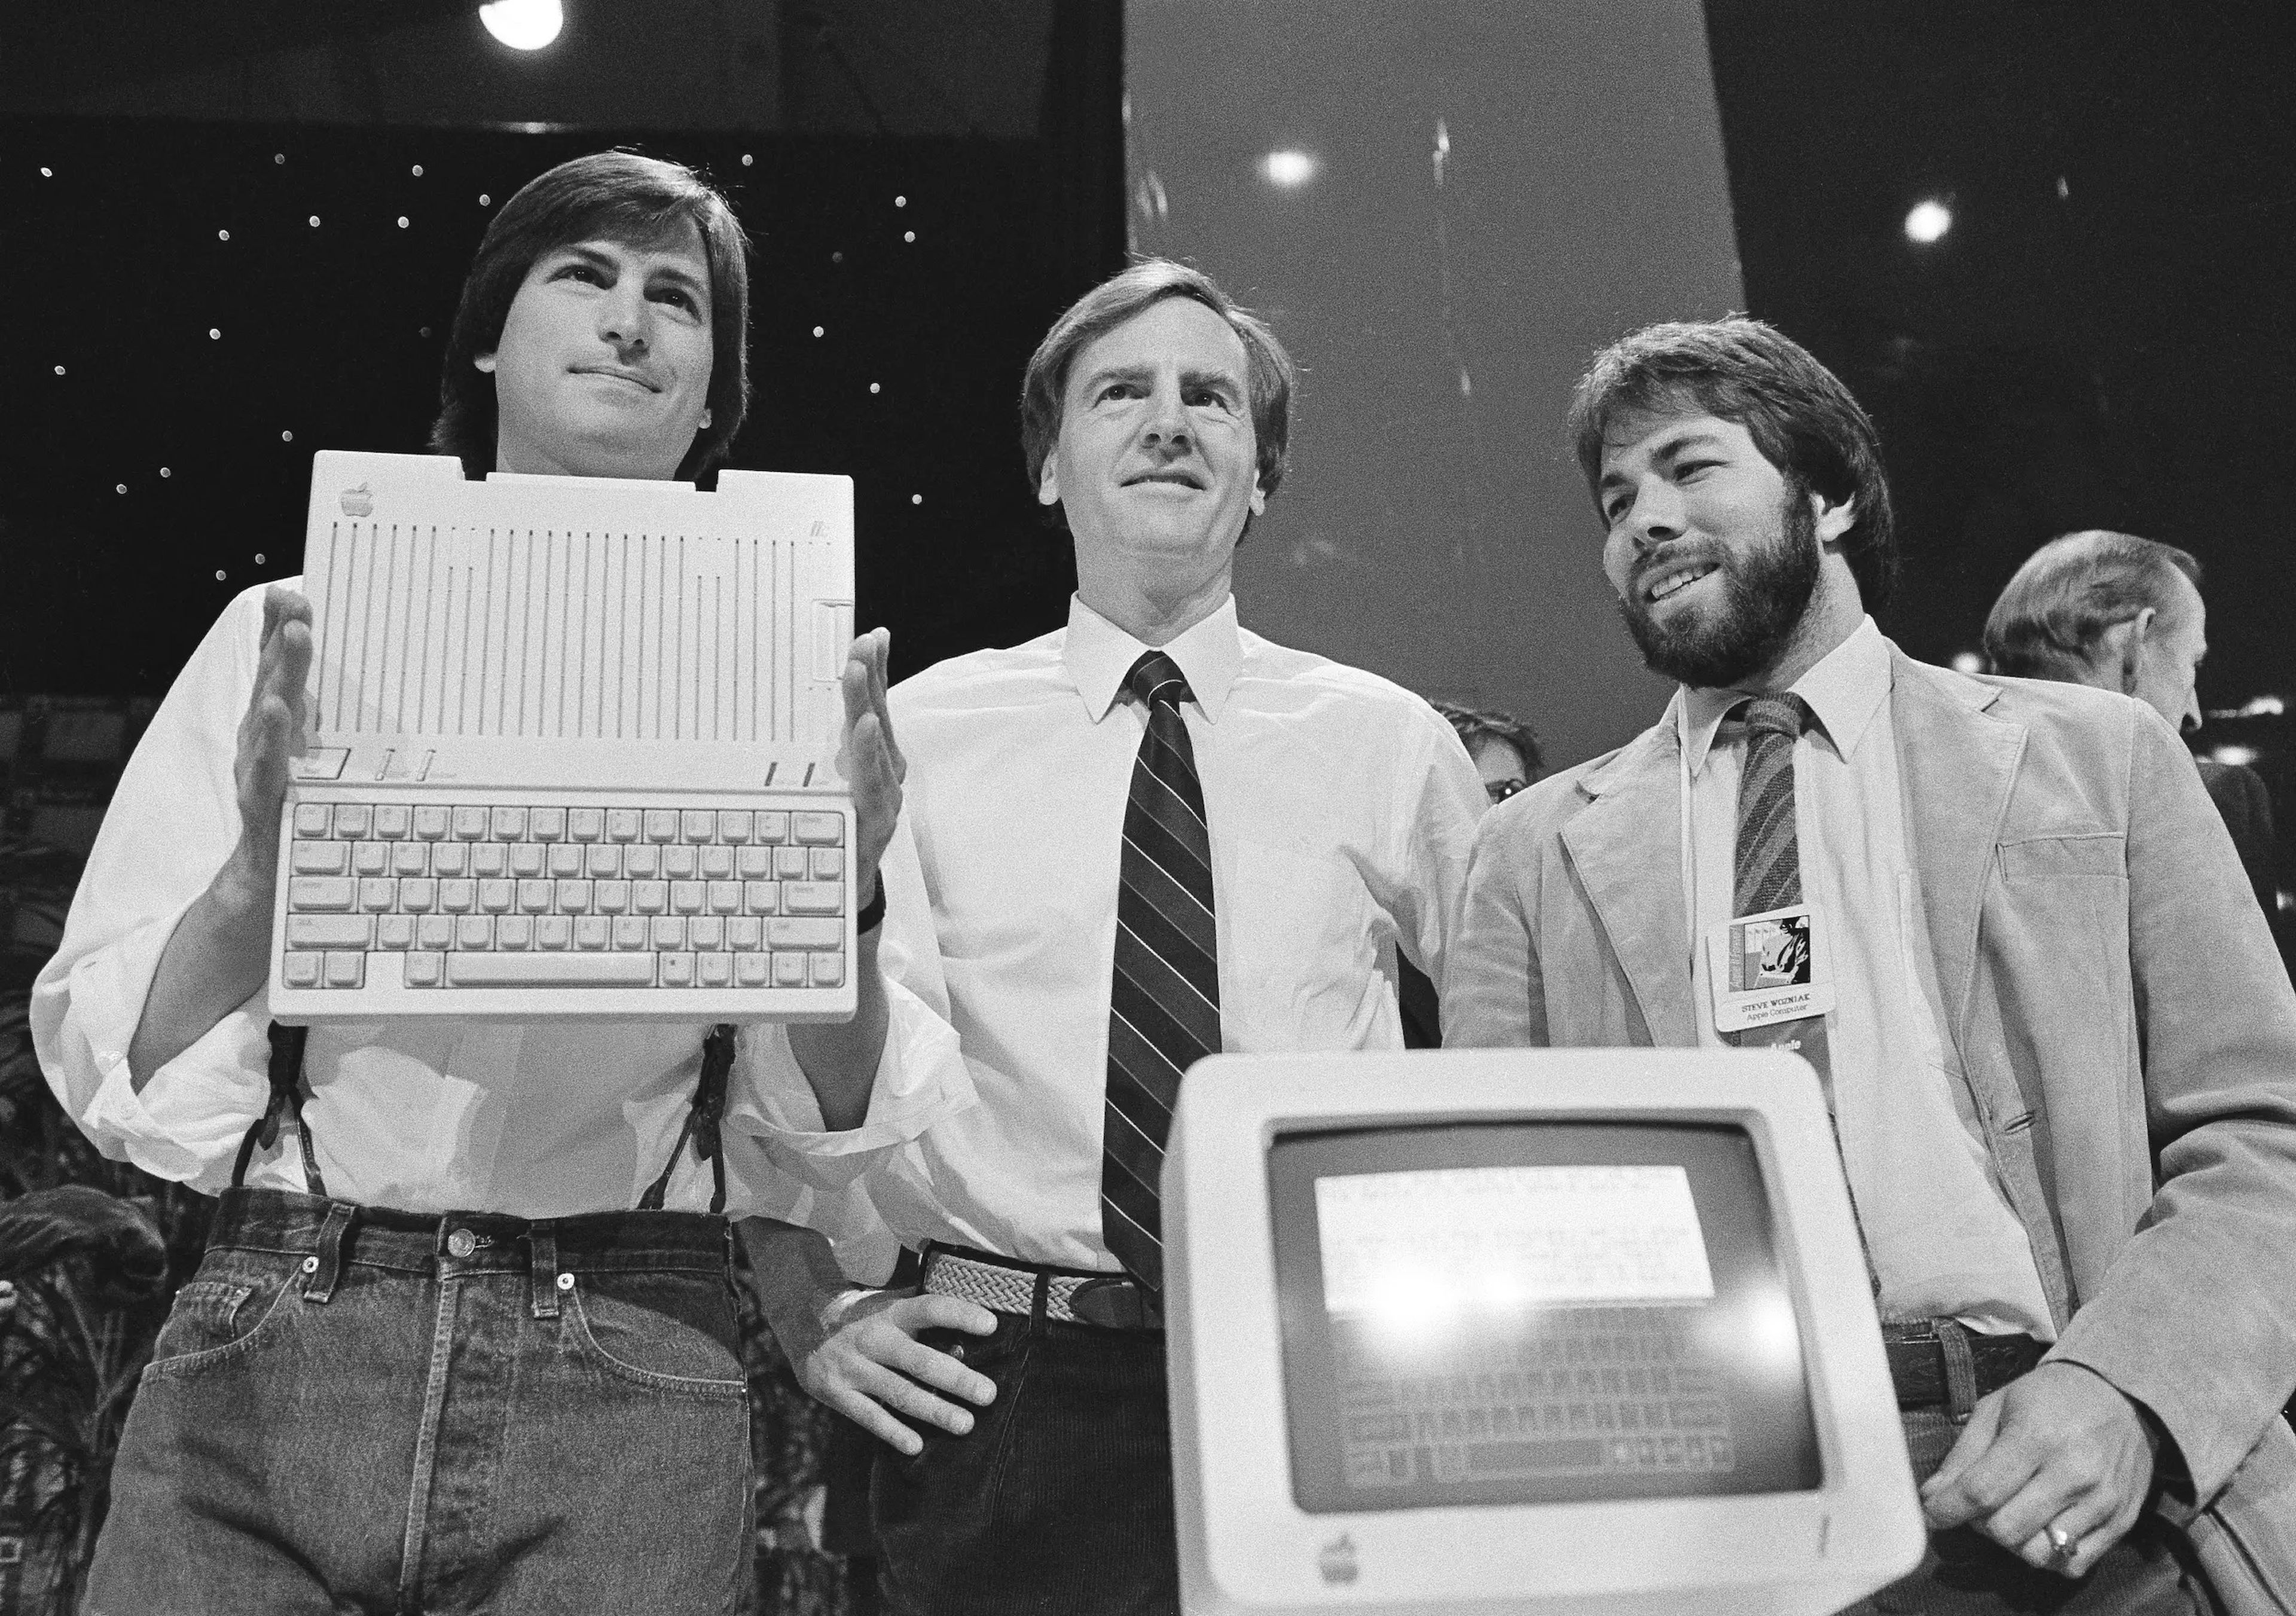 Steve Jobs (left), John Sculley (center), and Steve Wozniak unveil the new Apple II computer in San Francisco in 1984.